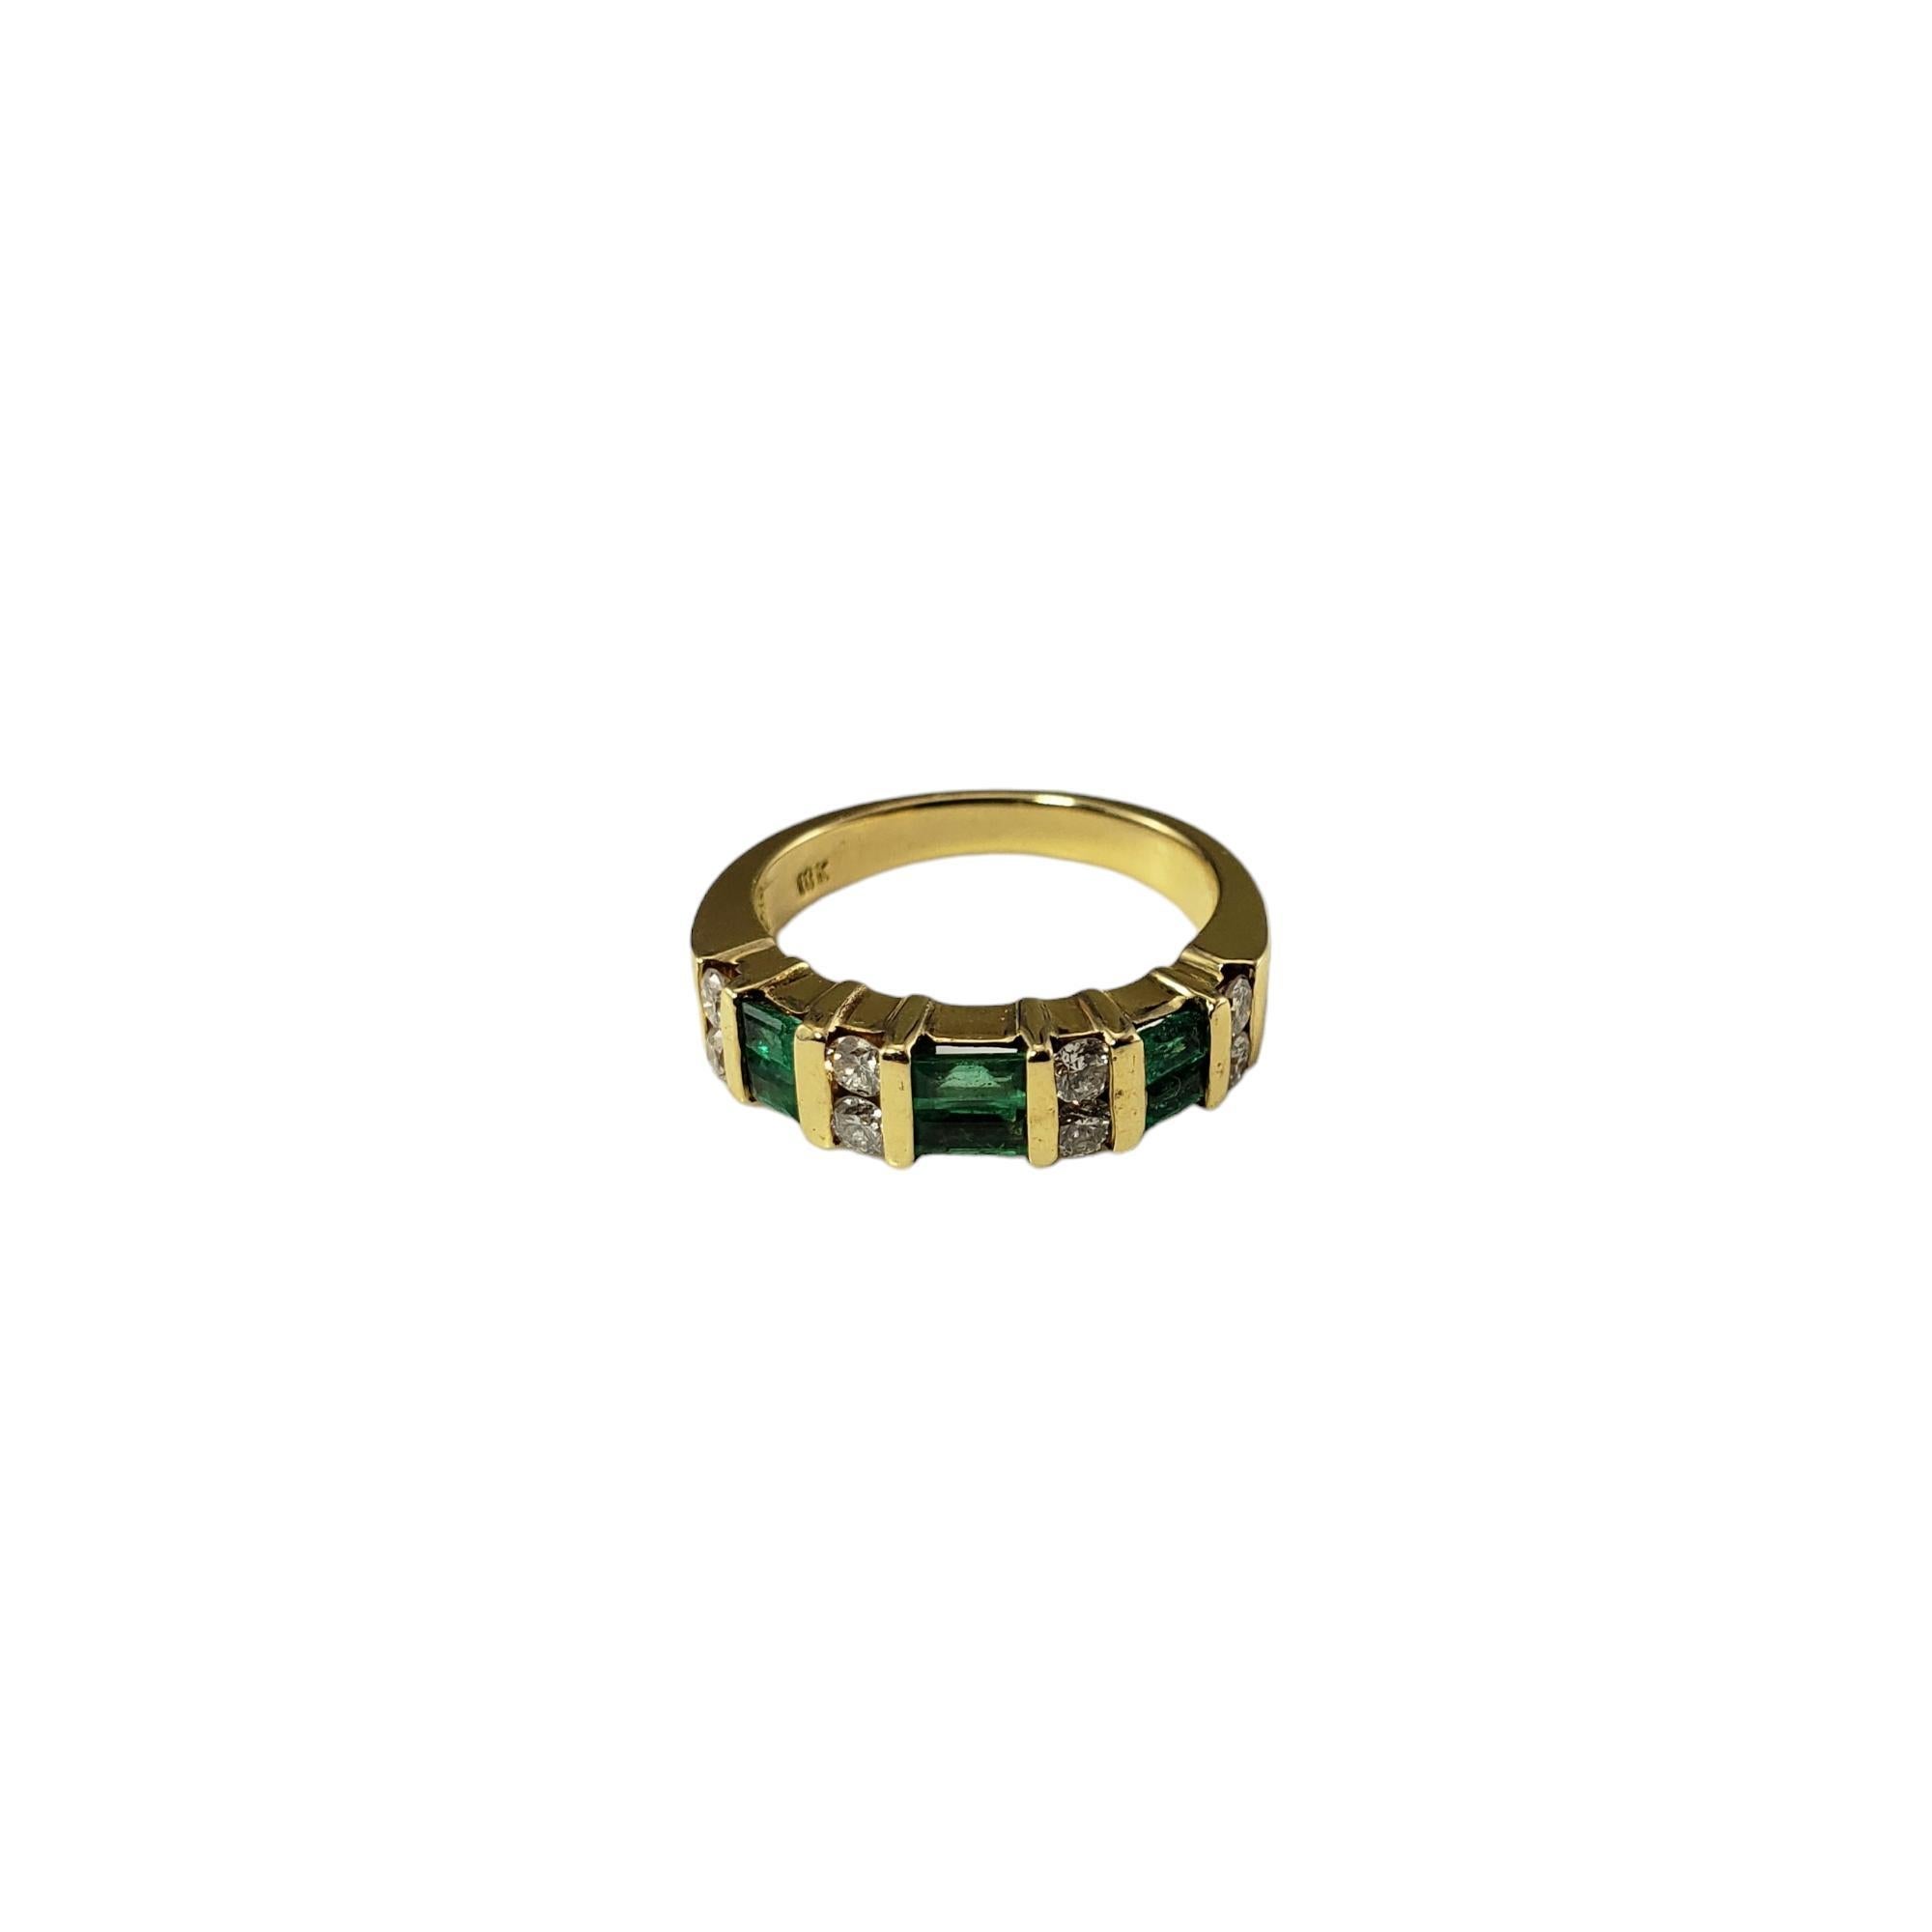 Vintage 18K Yellow Gold Emerald and Diamond Ring Size 5.75

This lovely band features six baguette emeralds (3.8 mm x 1.9 mm each) and eight round single cut diamonds set in classic 18K yellow gold.  Width: 4 mm.  Shank: 2 mm.

Total emerald weight: